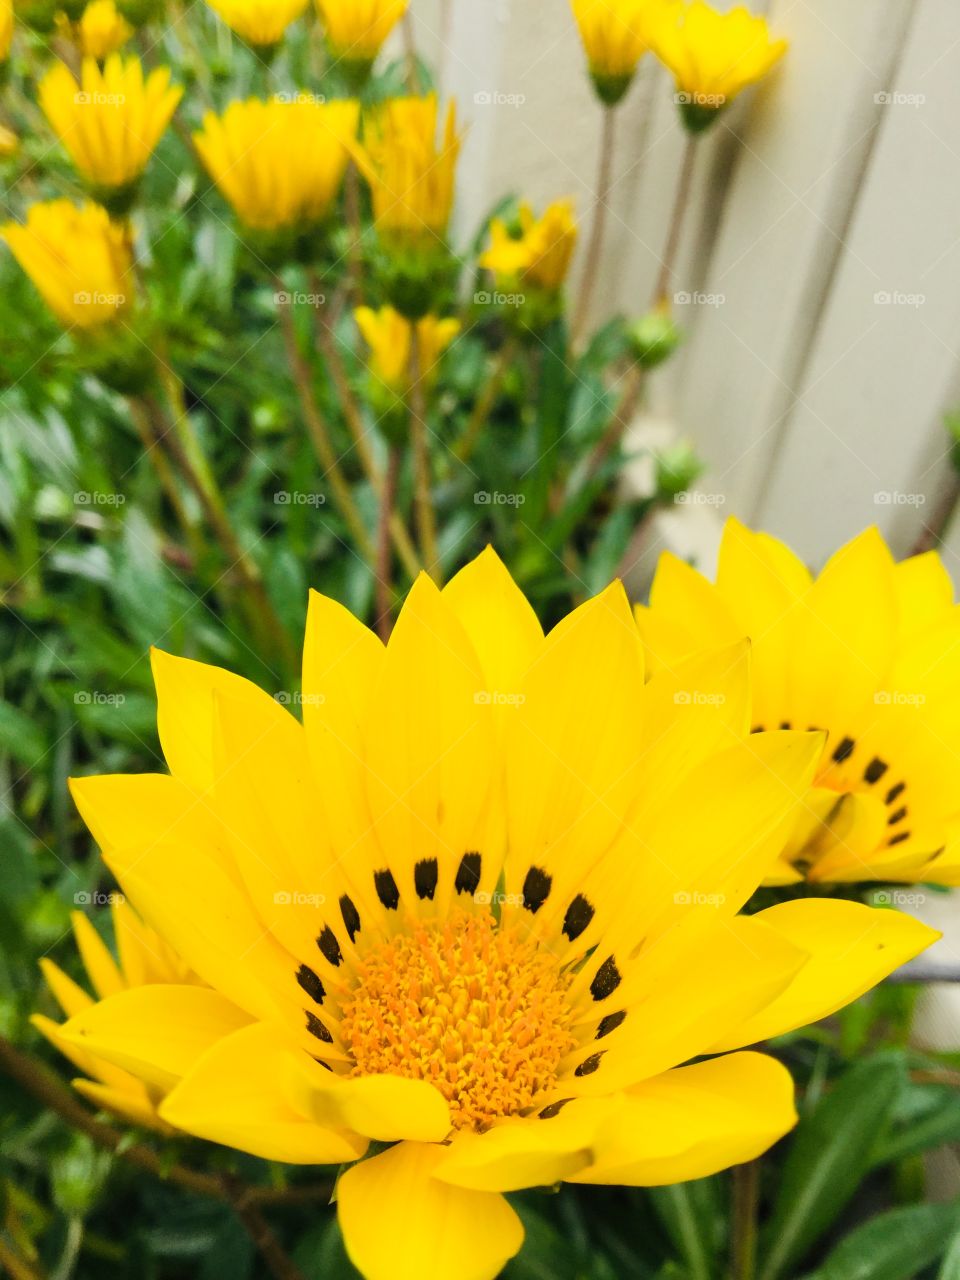 This is a photo of a bright yellow flower with black spots around the middle. The flowers are next to a wooden fence.